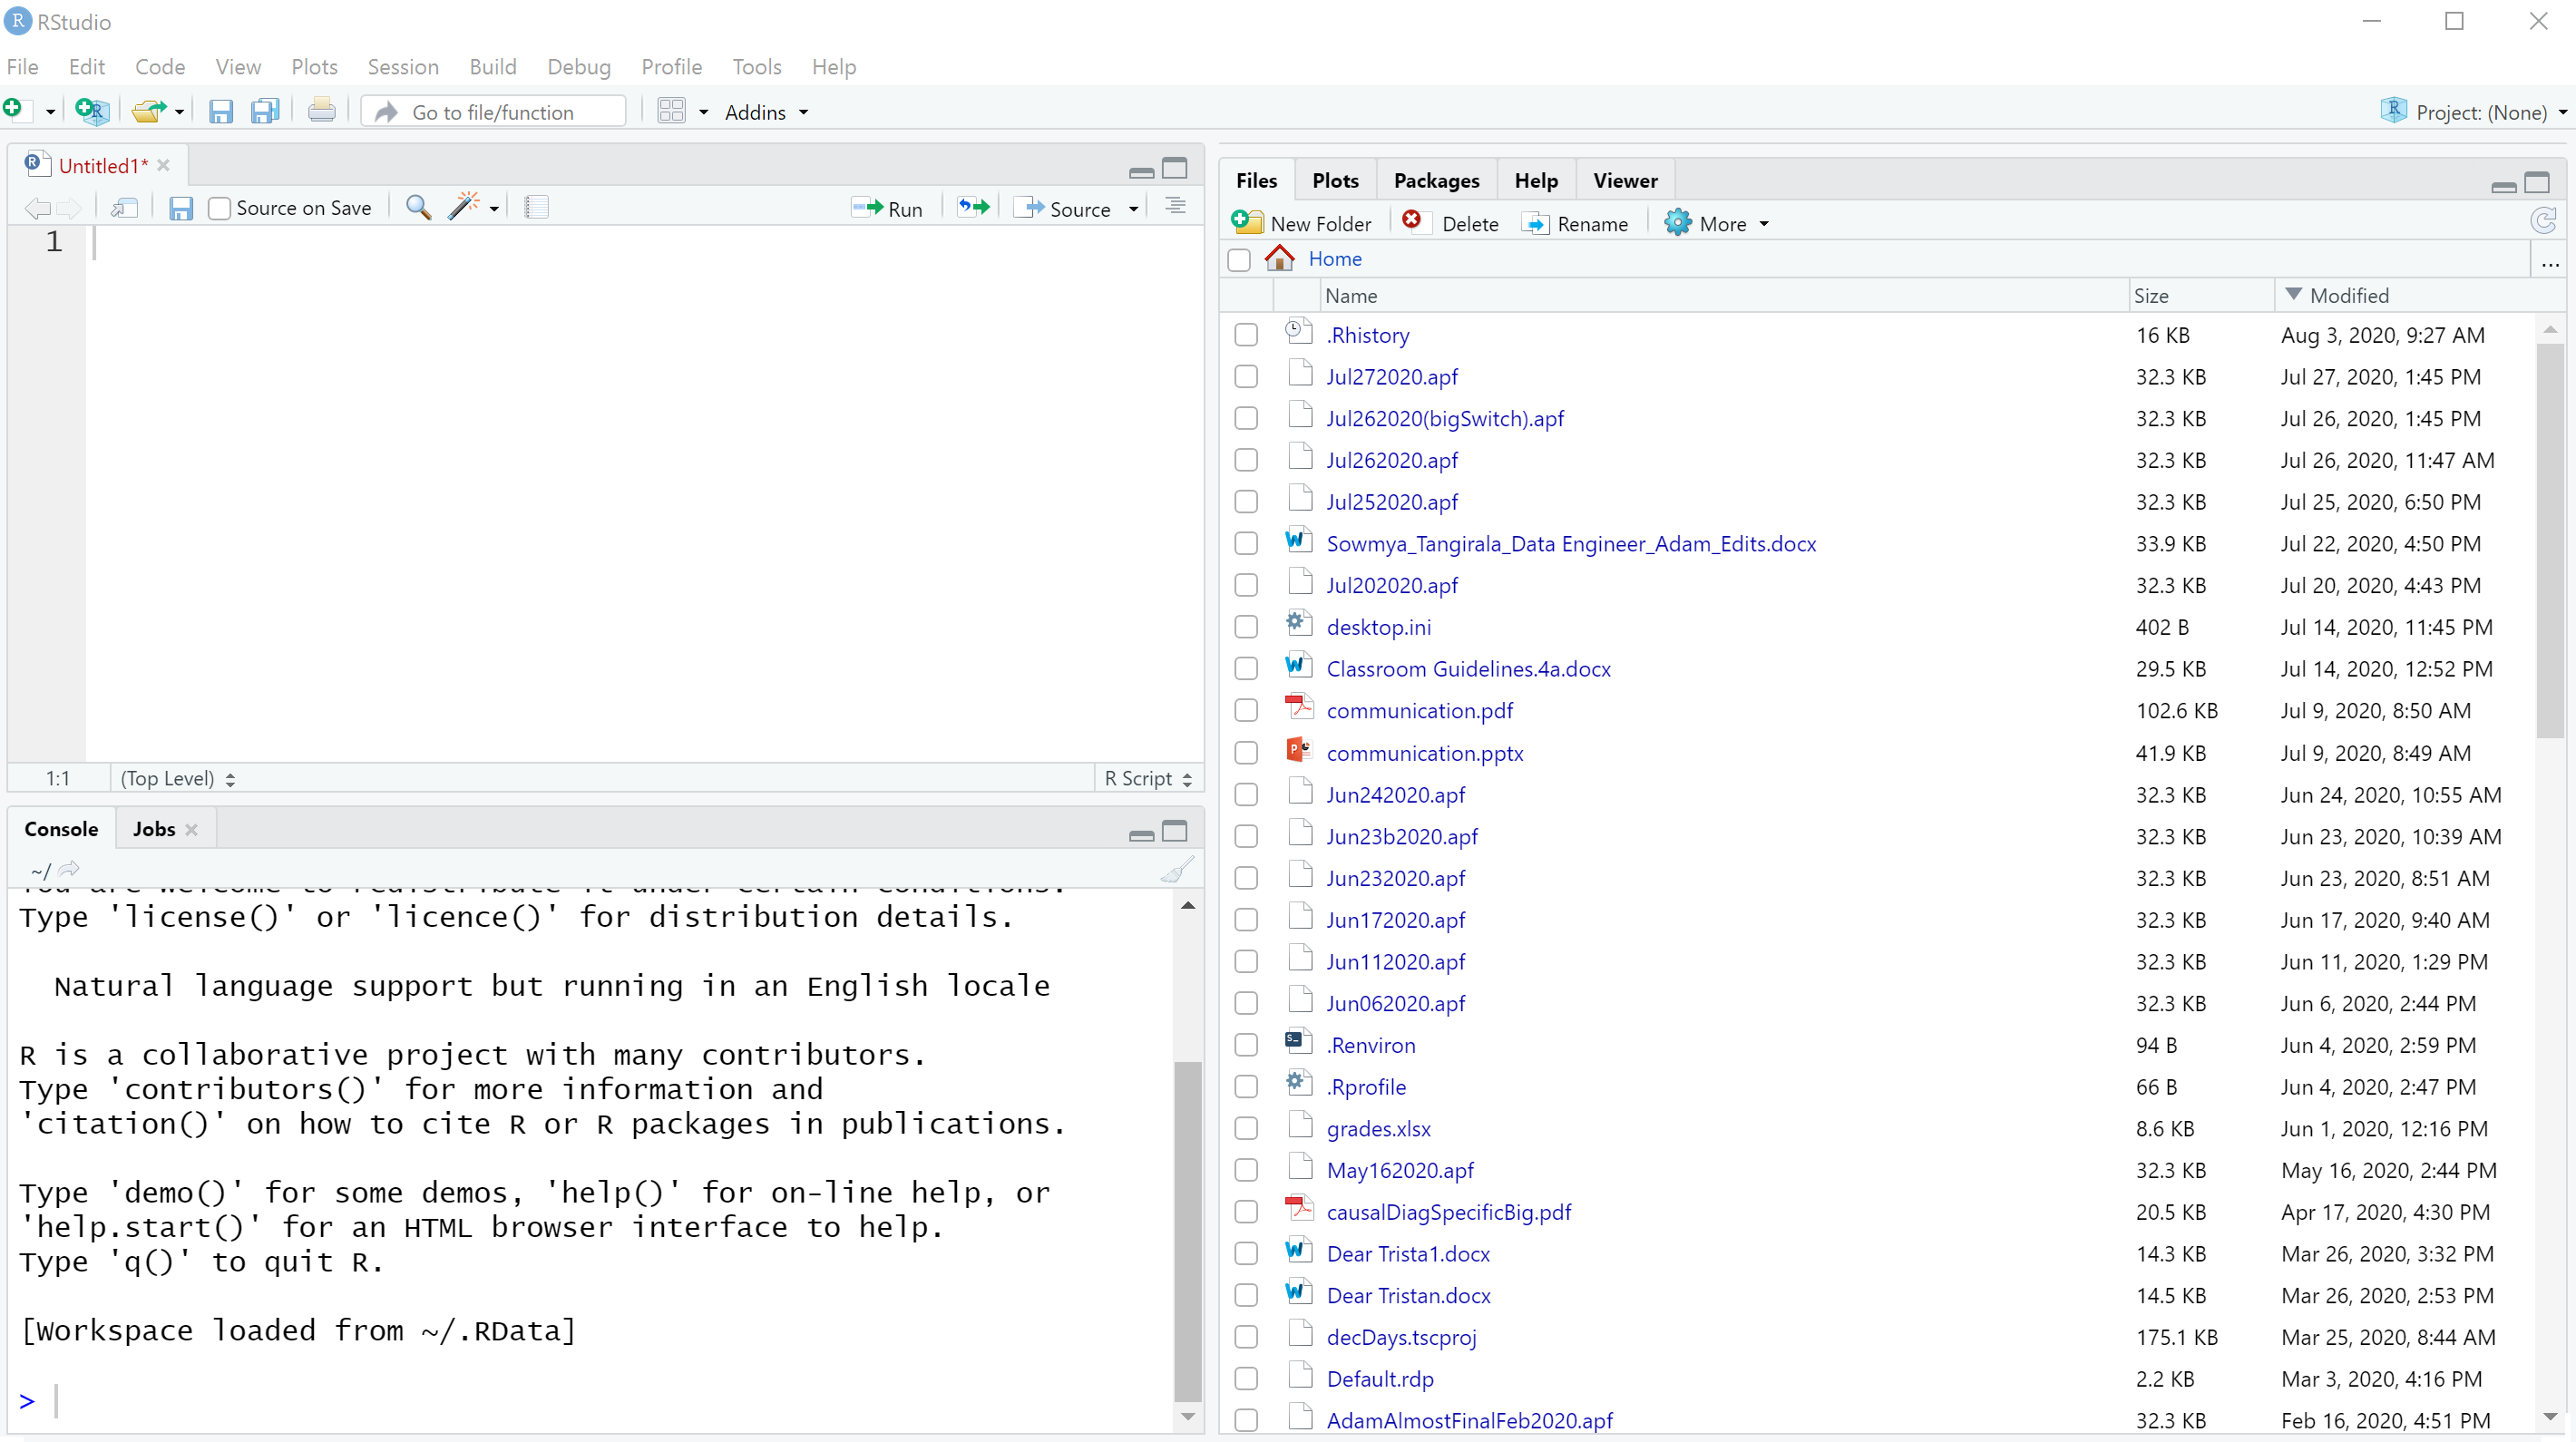 Picture of the RStudio interface.  Use this interace to work through the code in this book.